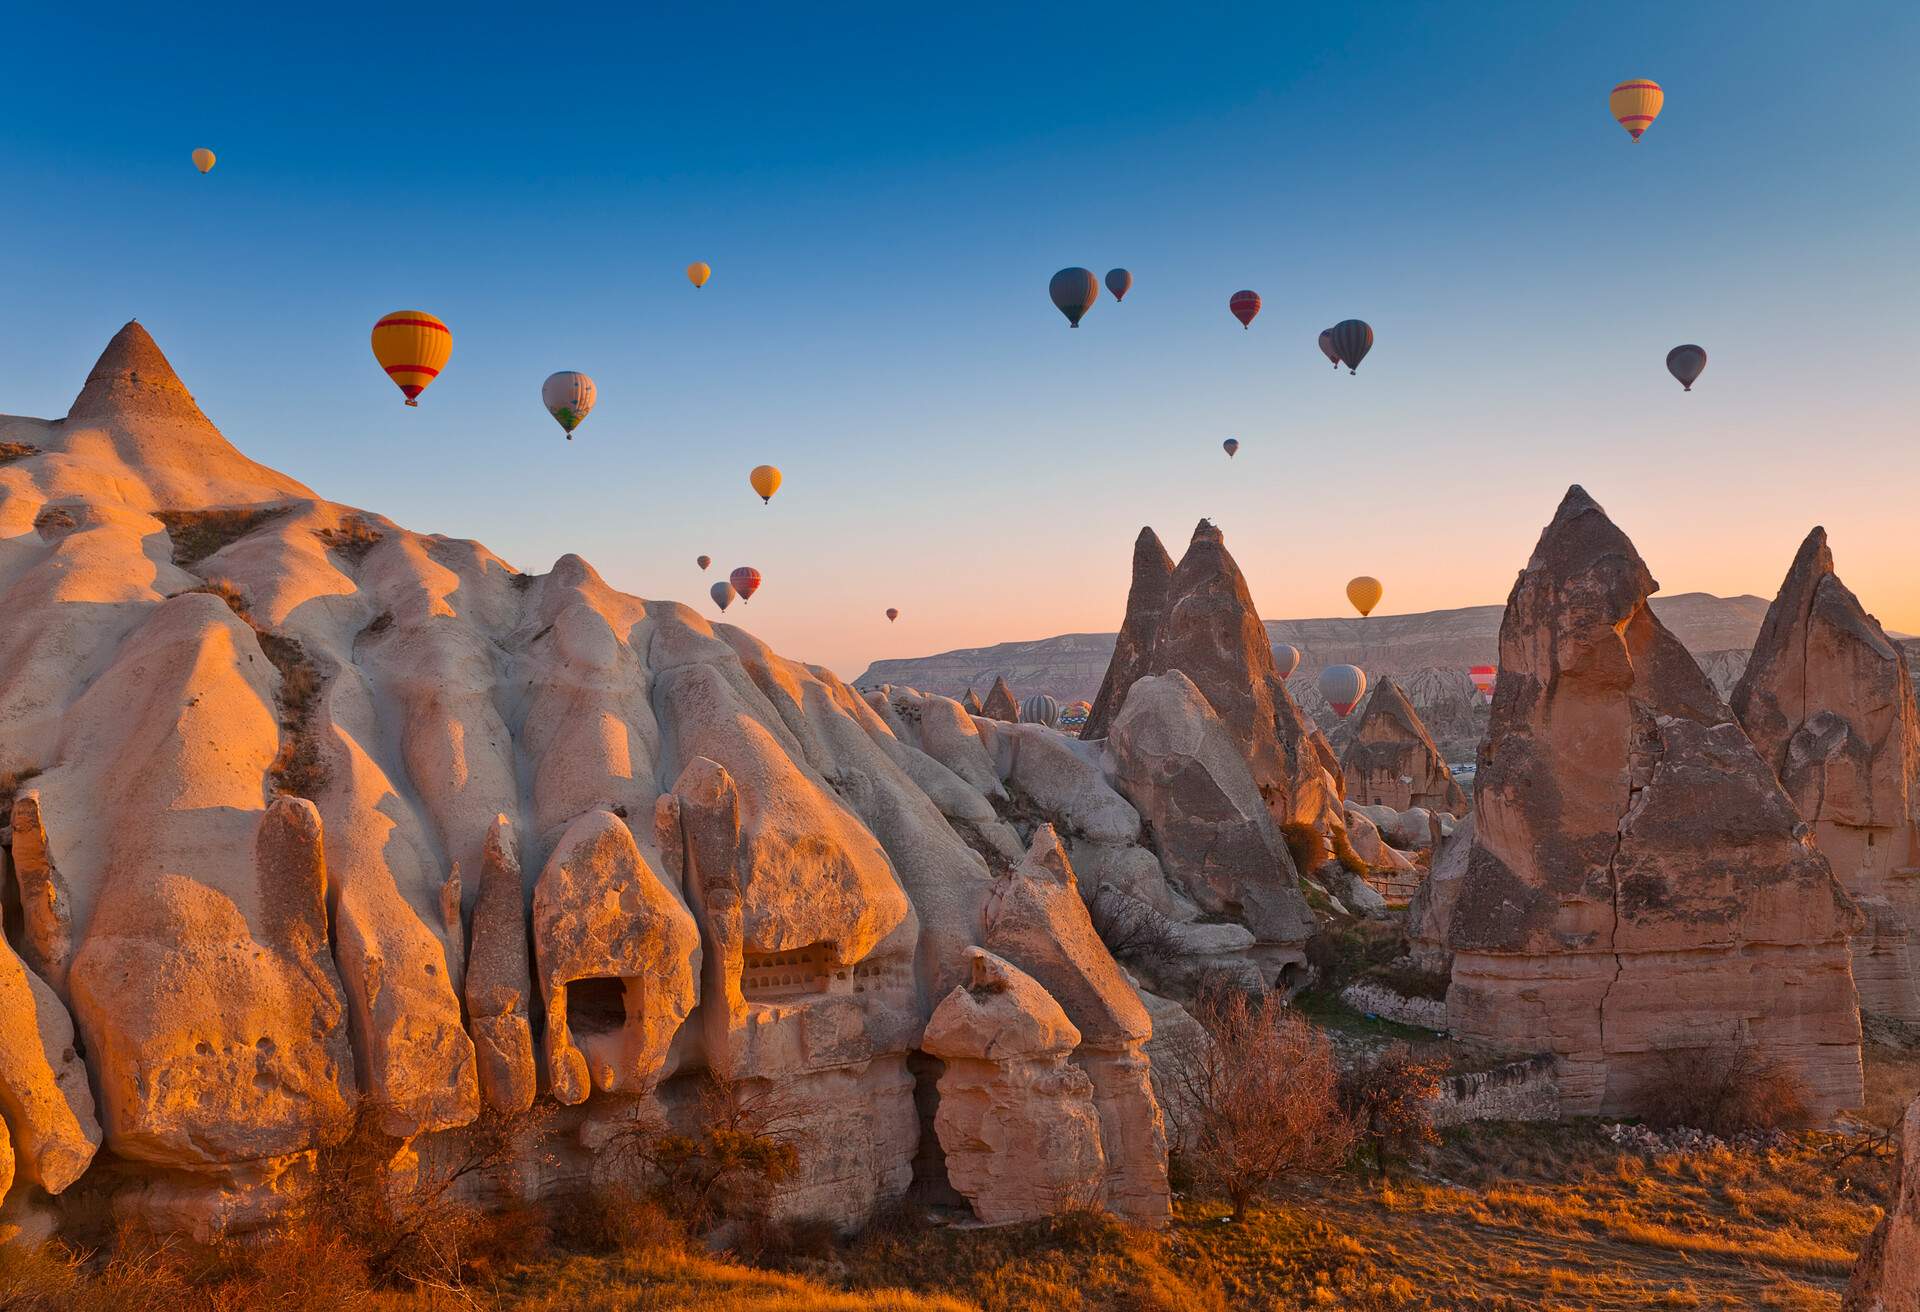 Hot Air Balloons rise up over the Goreme Valley in Cappadocia, Turkey